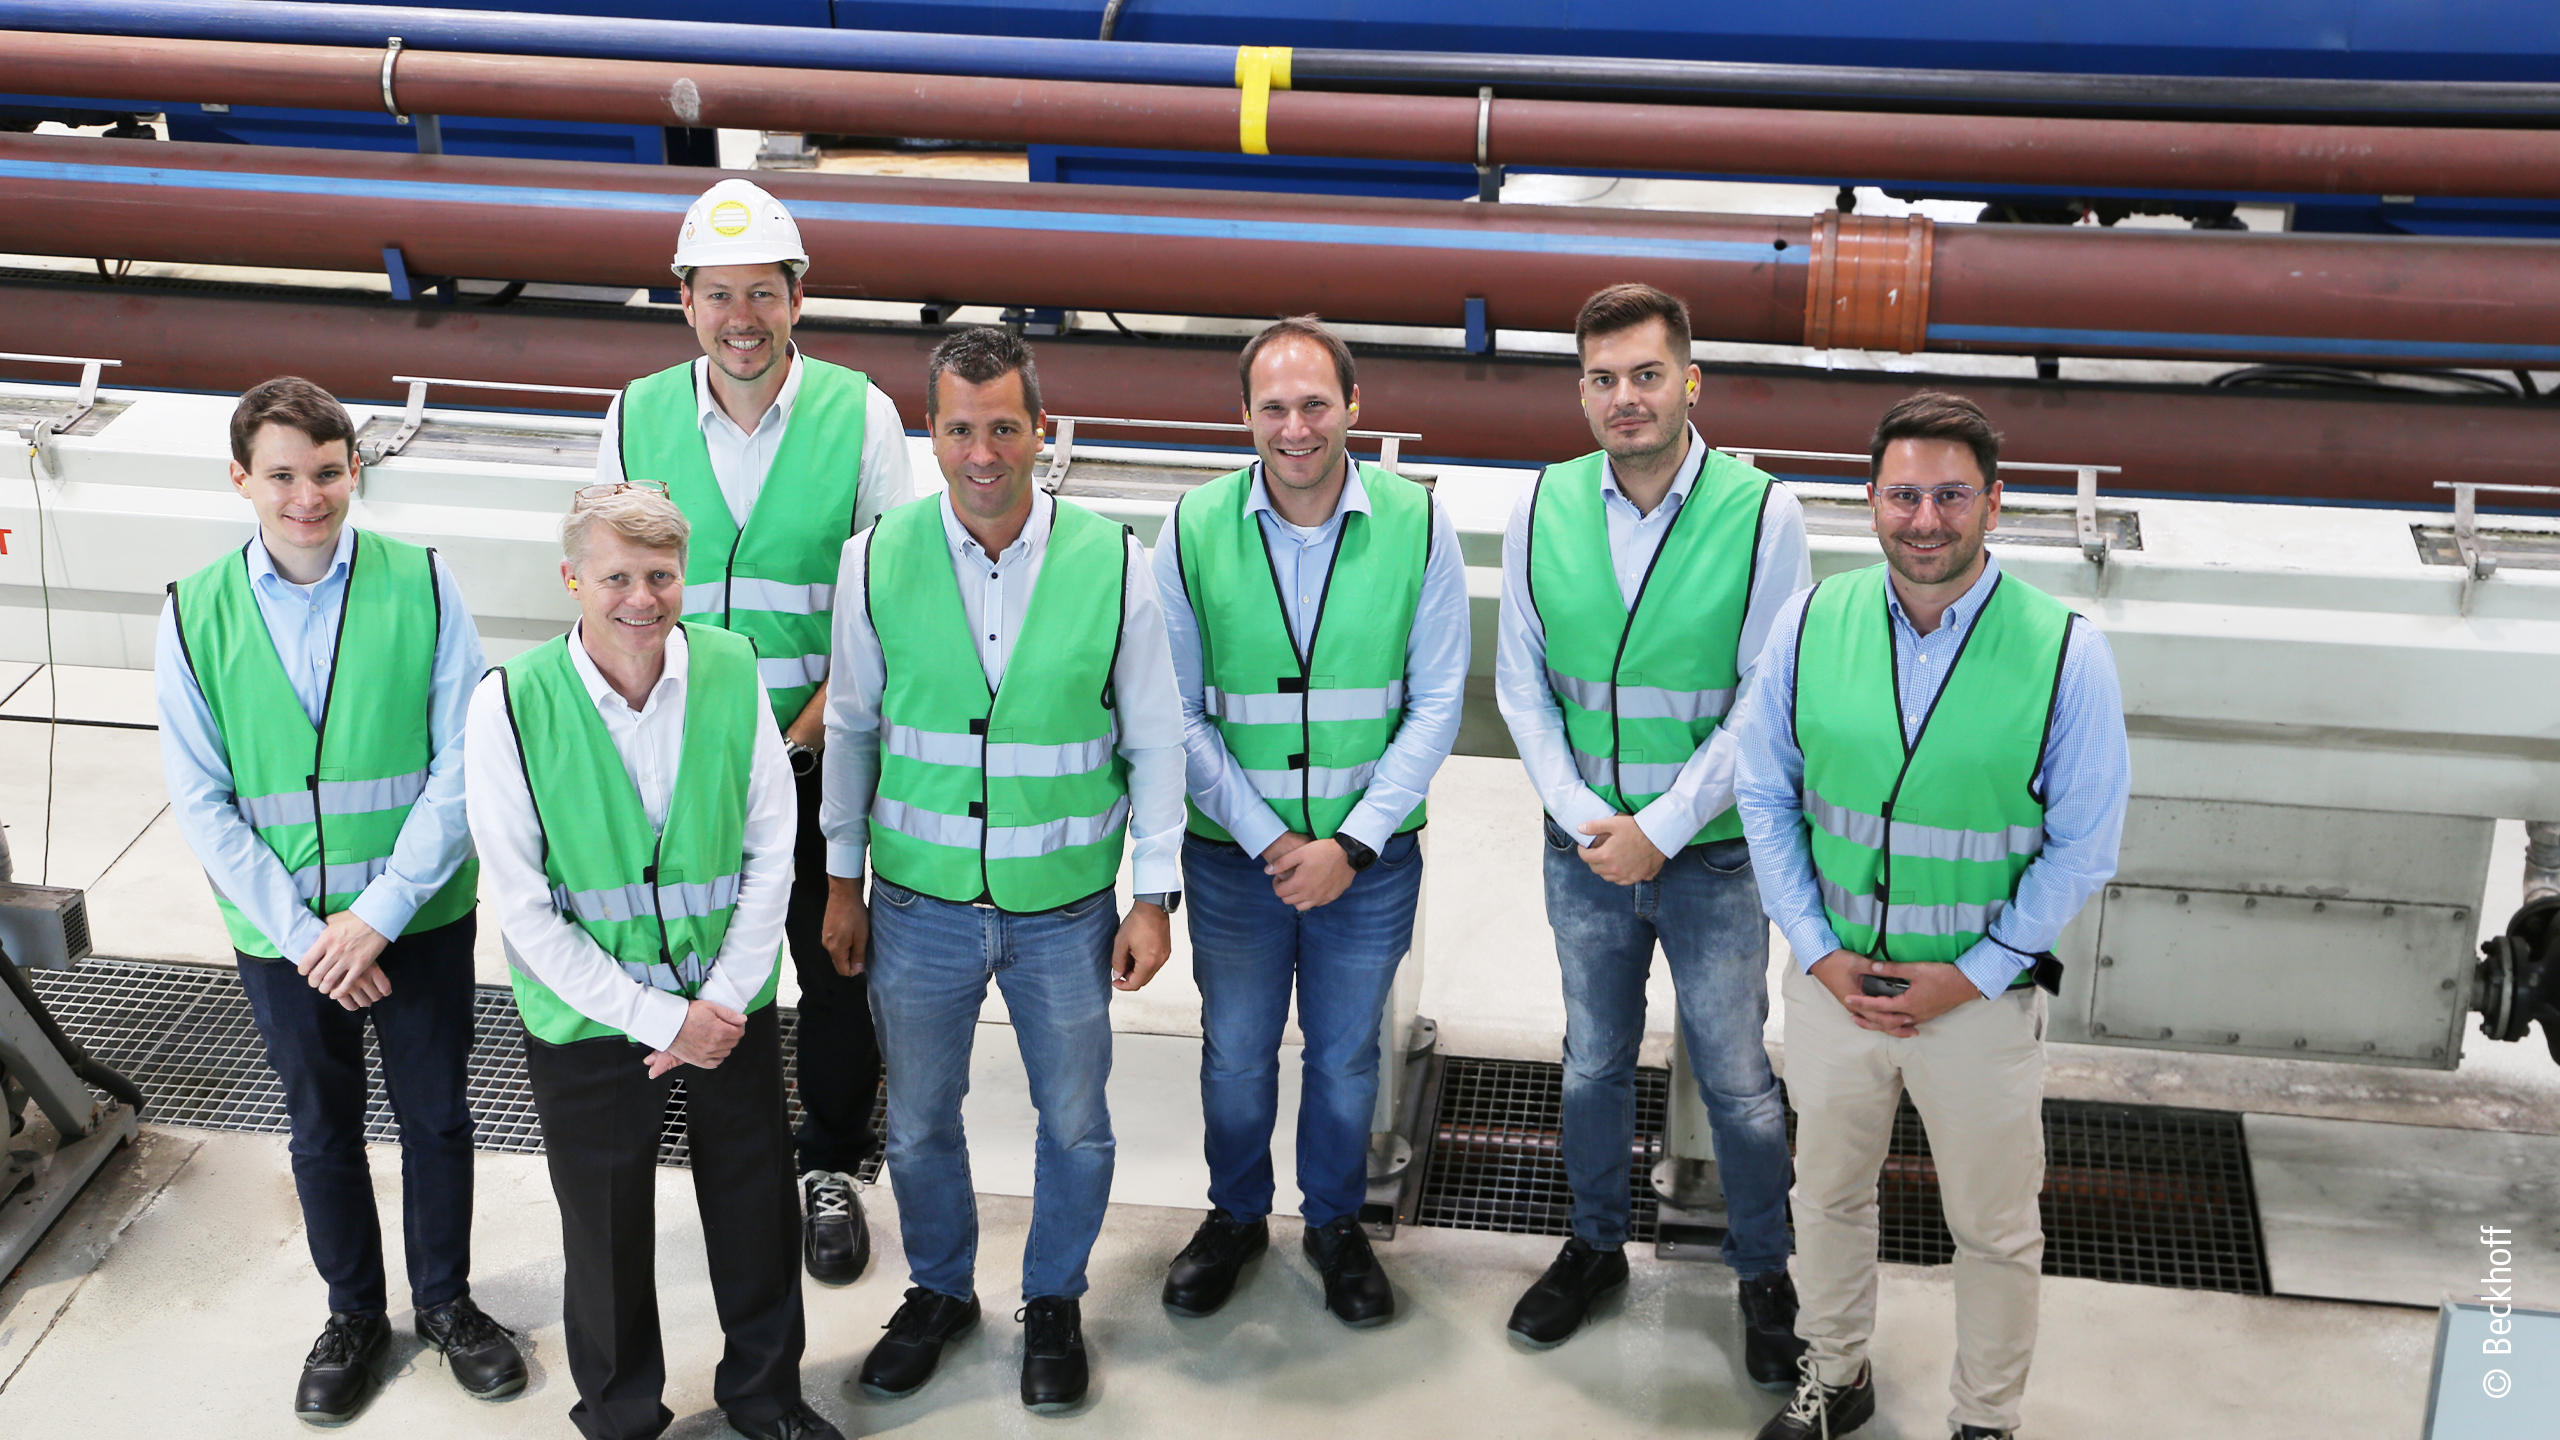 The good cooperation between the team of experts from the end customer, the system providers and from Beckhoff is crucial for success, especially with comprehensive projects such as this one.  